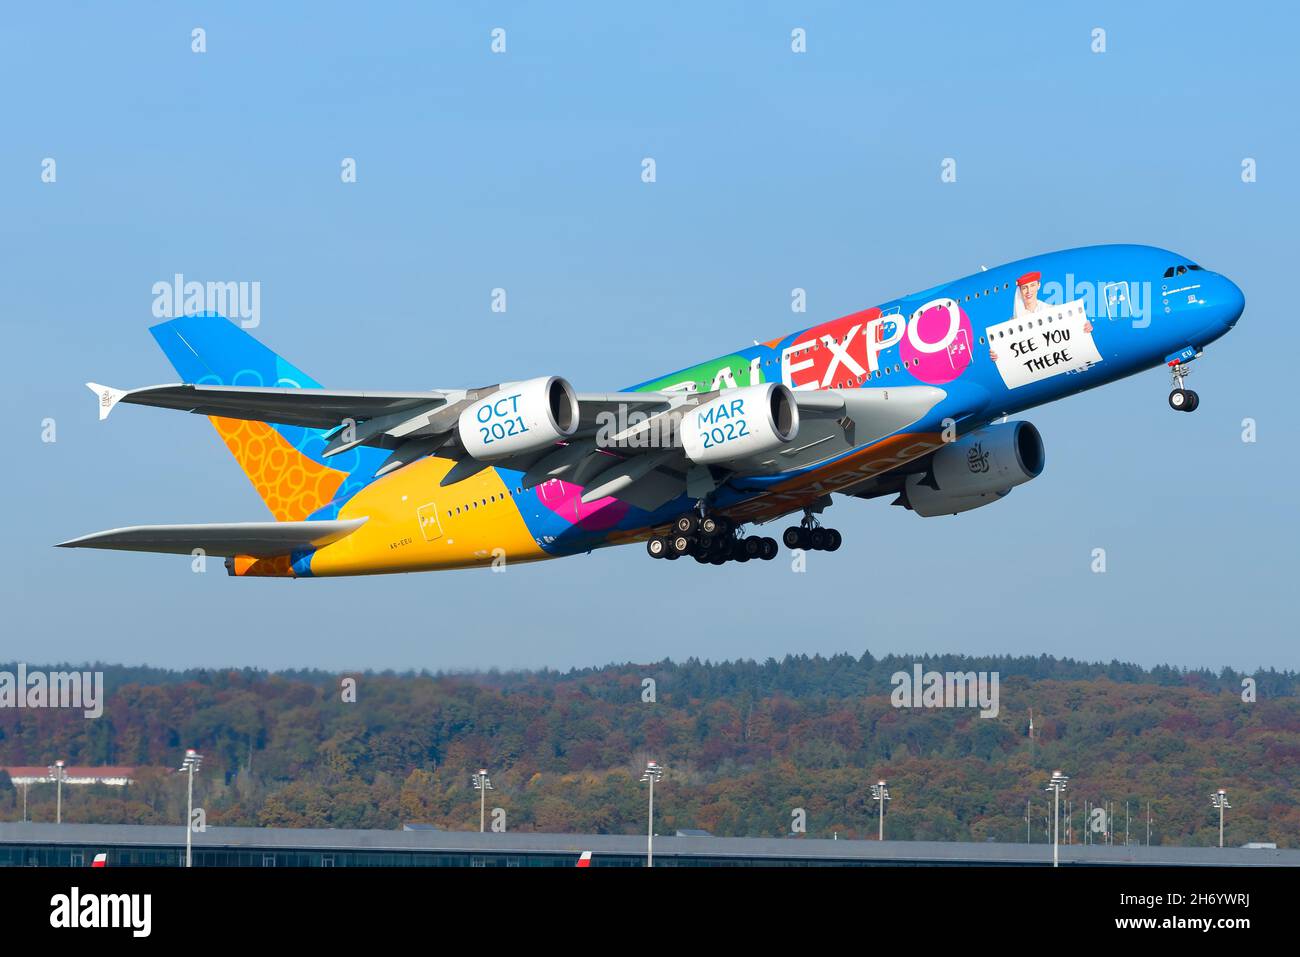 Emirates Airline Expo 2020 special livery Airbus A380 taking off. Airplane A380-800 featuring a colourful livery. Stock Photo